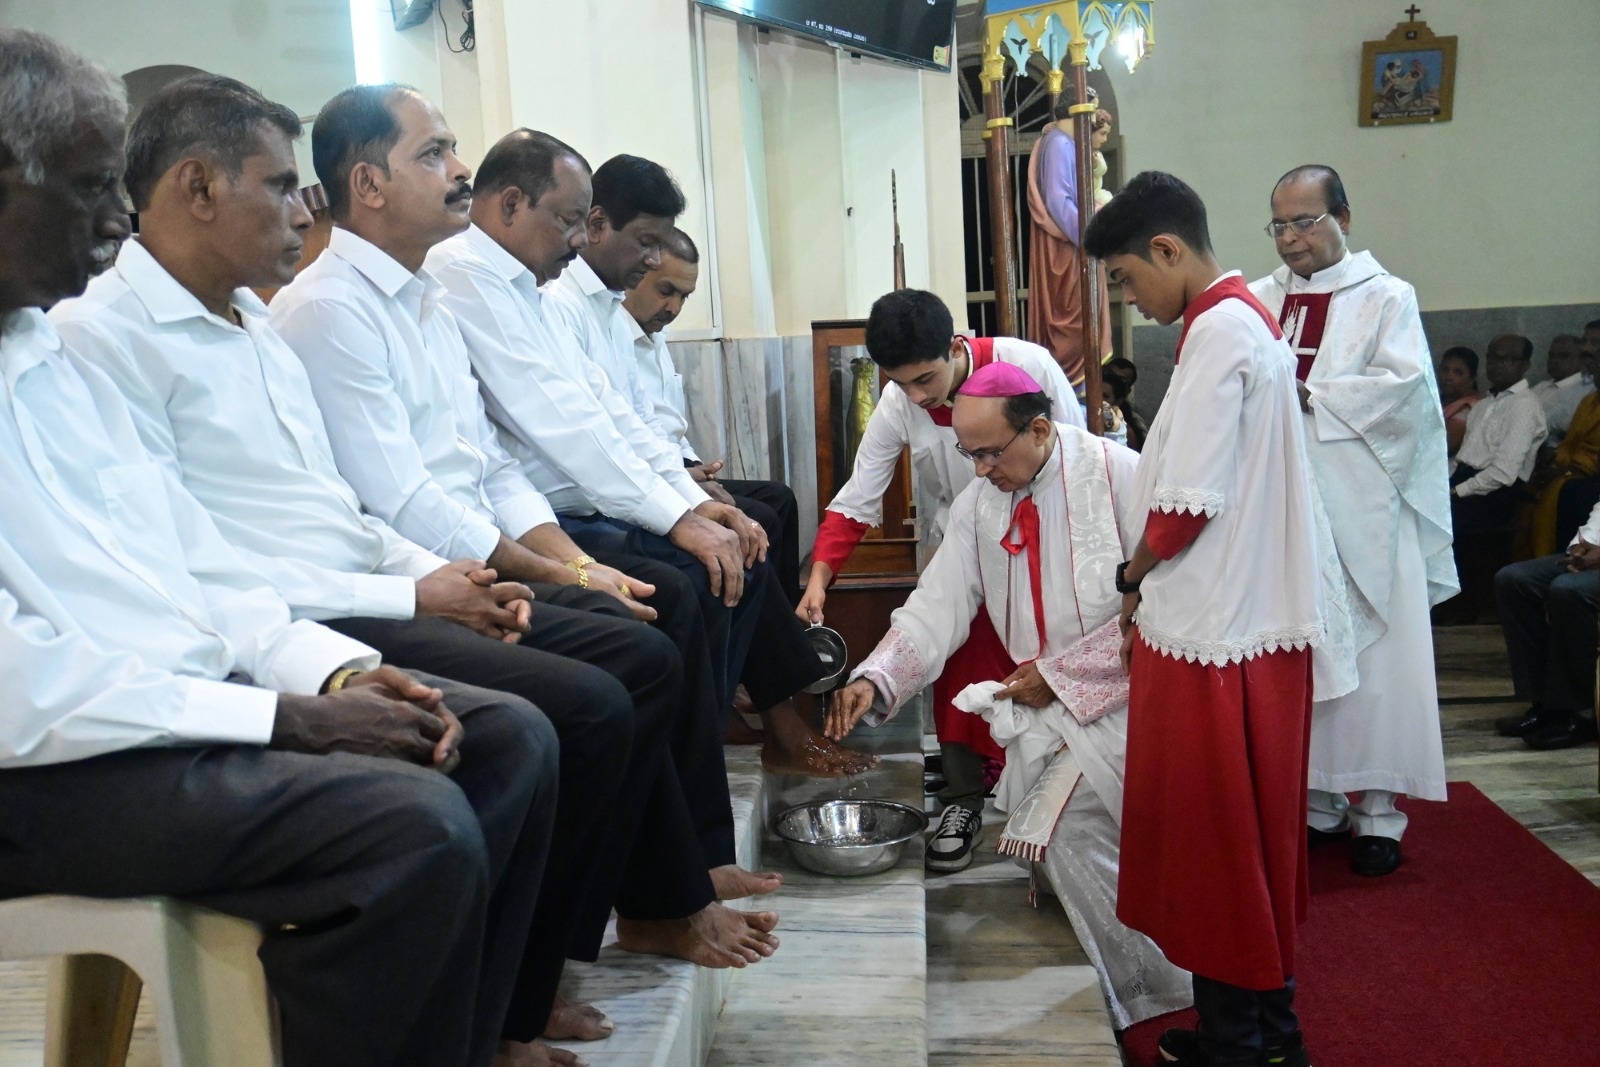 Milagres Cathedral, Kallianpur observes Maundy Thursday with great devotion and solemnity